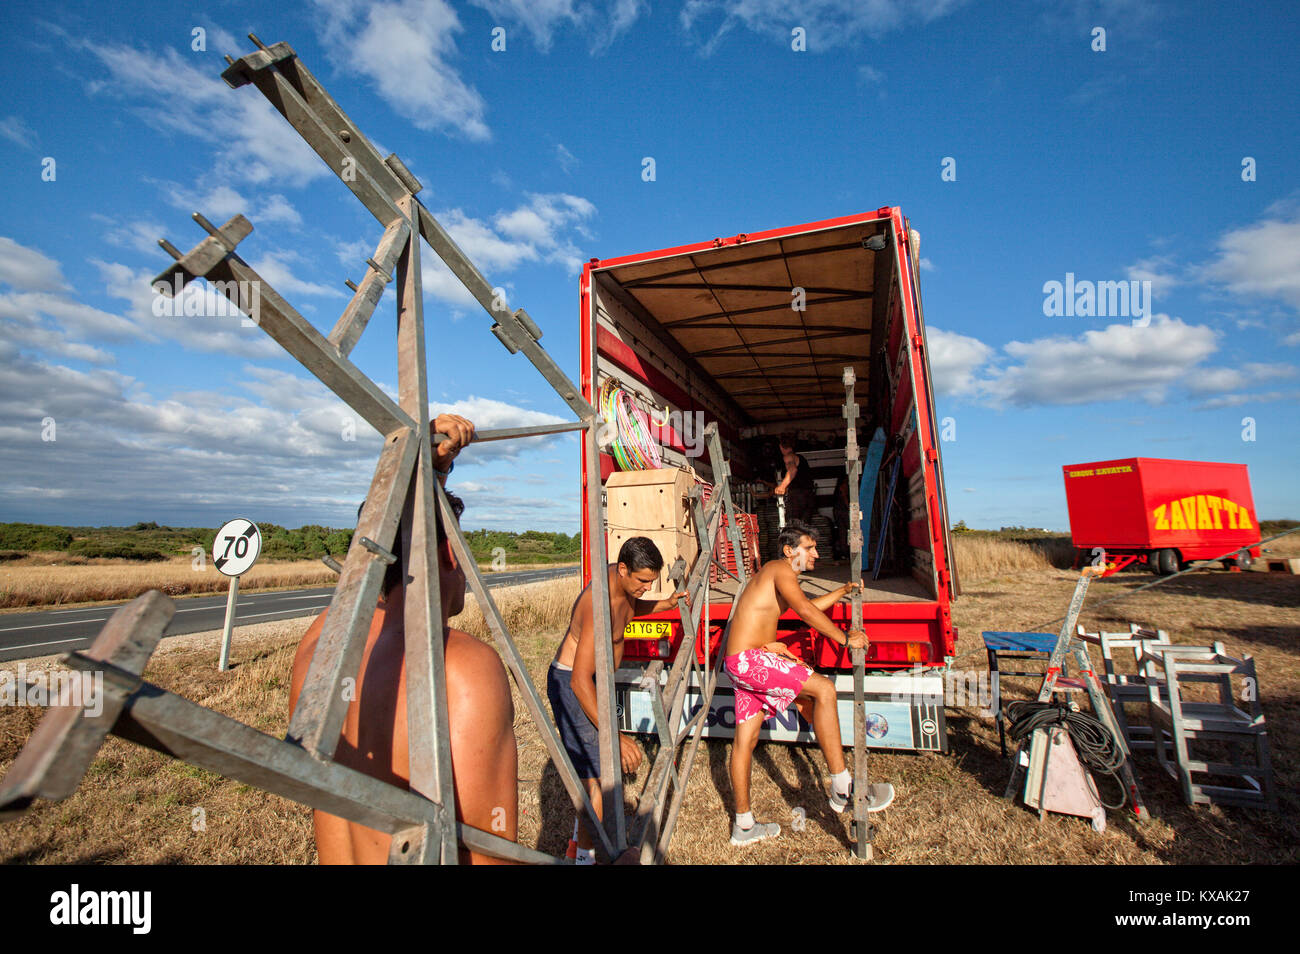 Members of Zavatta family loading truck with parts of circus ring stage, Zavatta Circus, Kerroch, Morbihan, Brittany, France Stock Photo